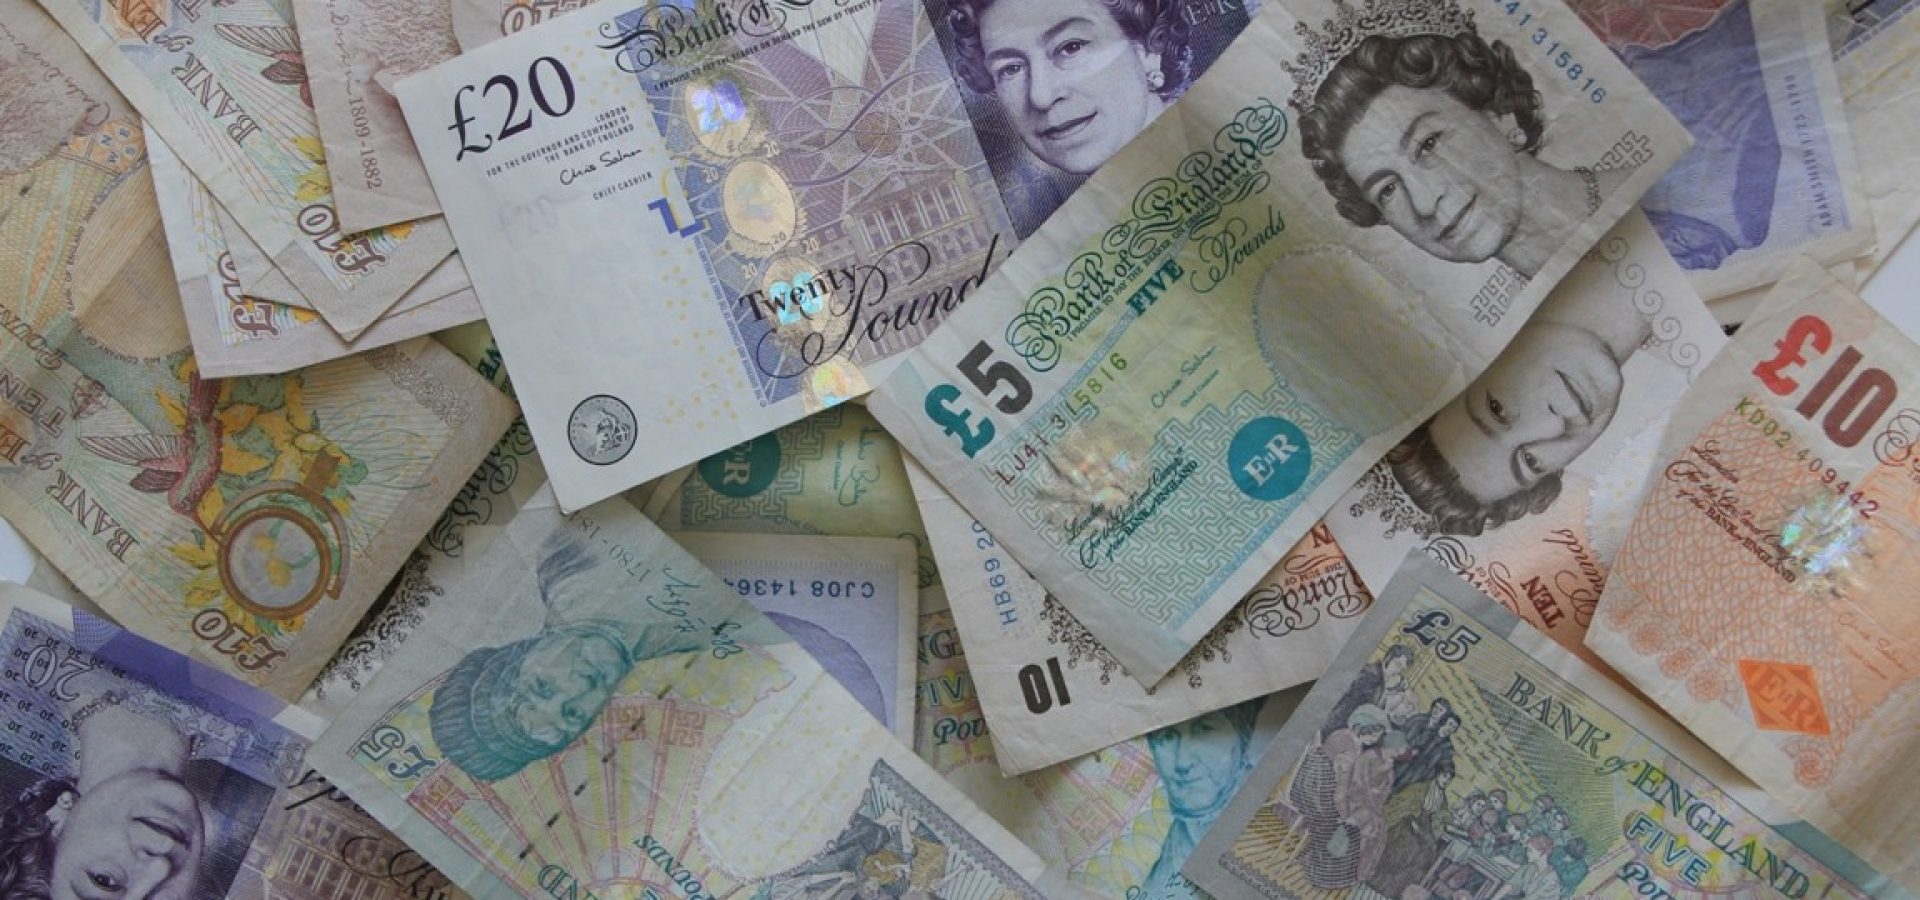 Sterling remained strong despite the British economy's problems